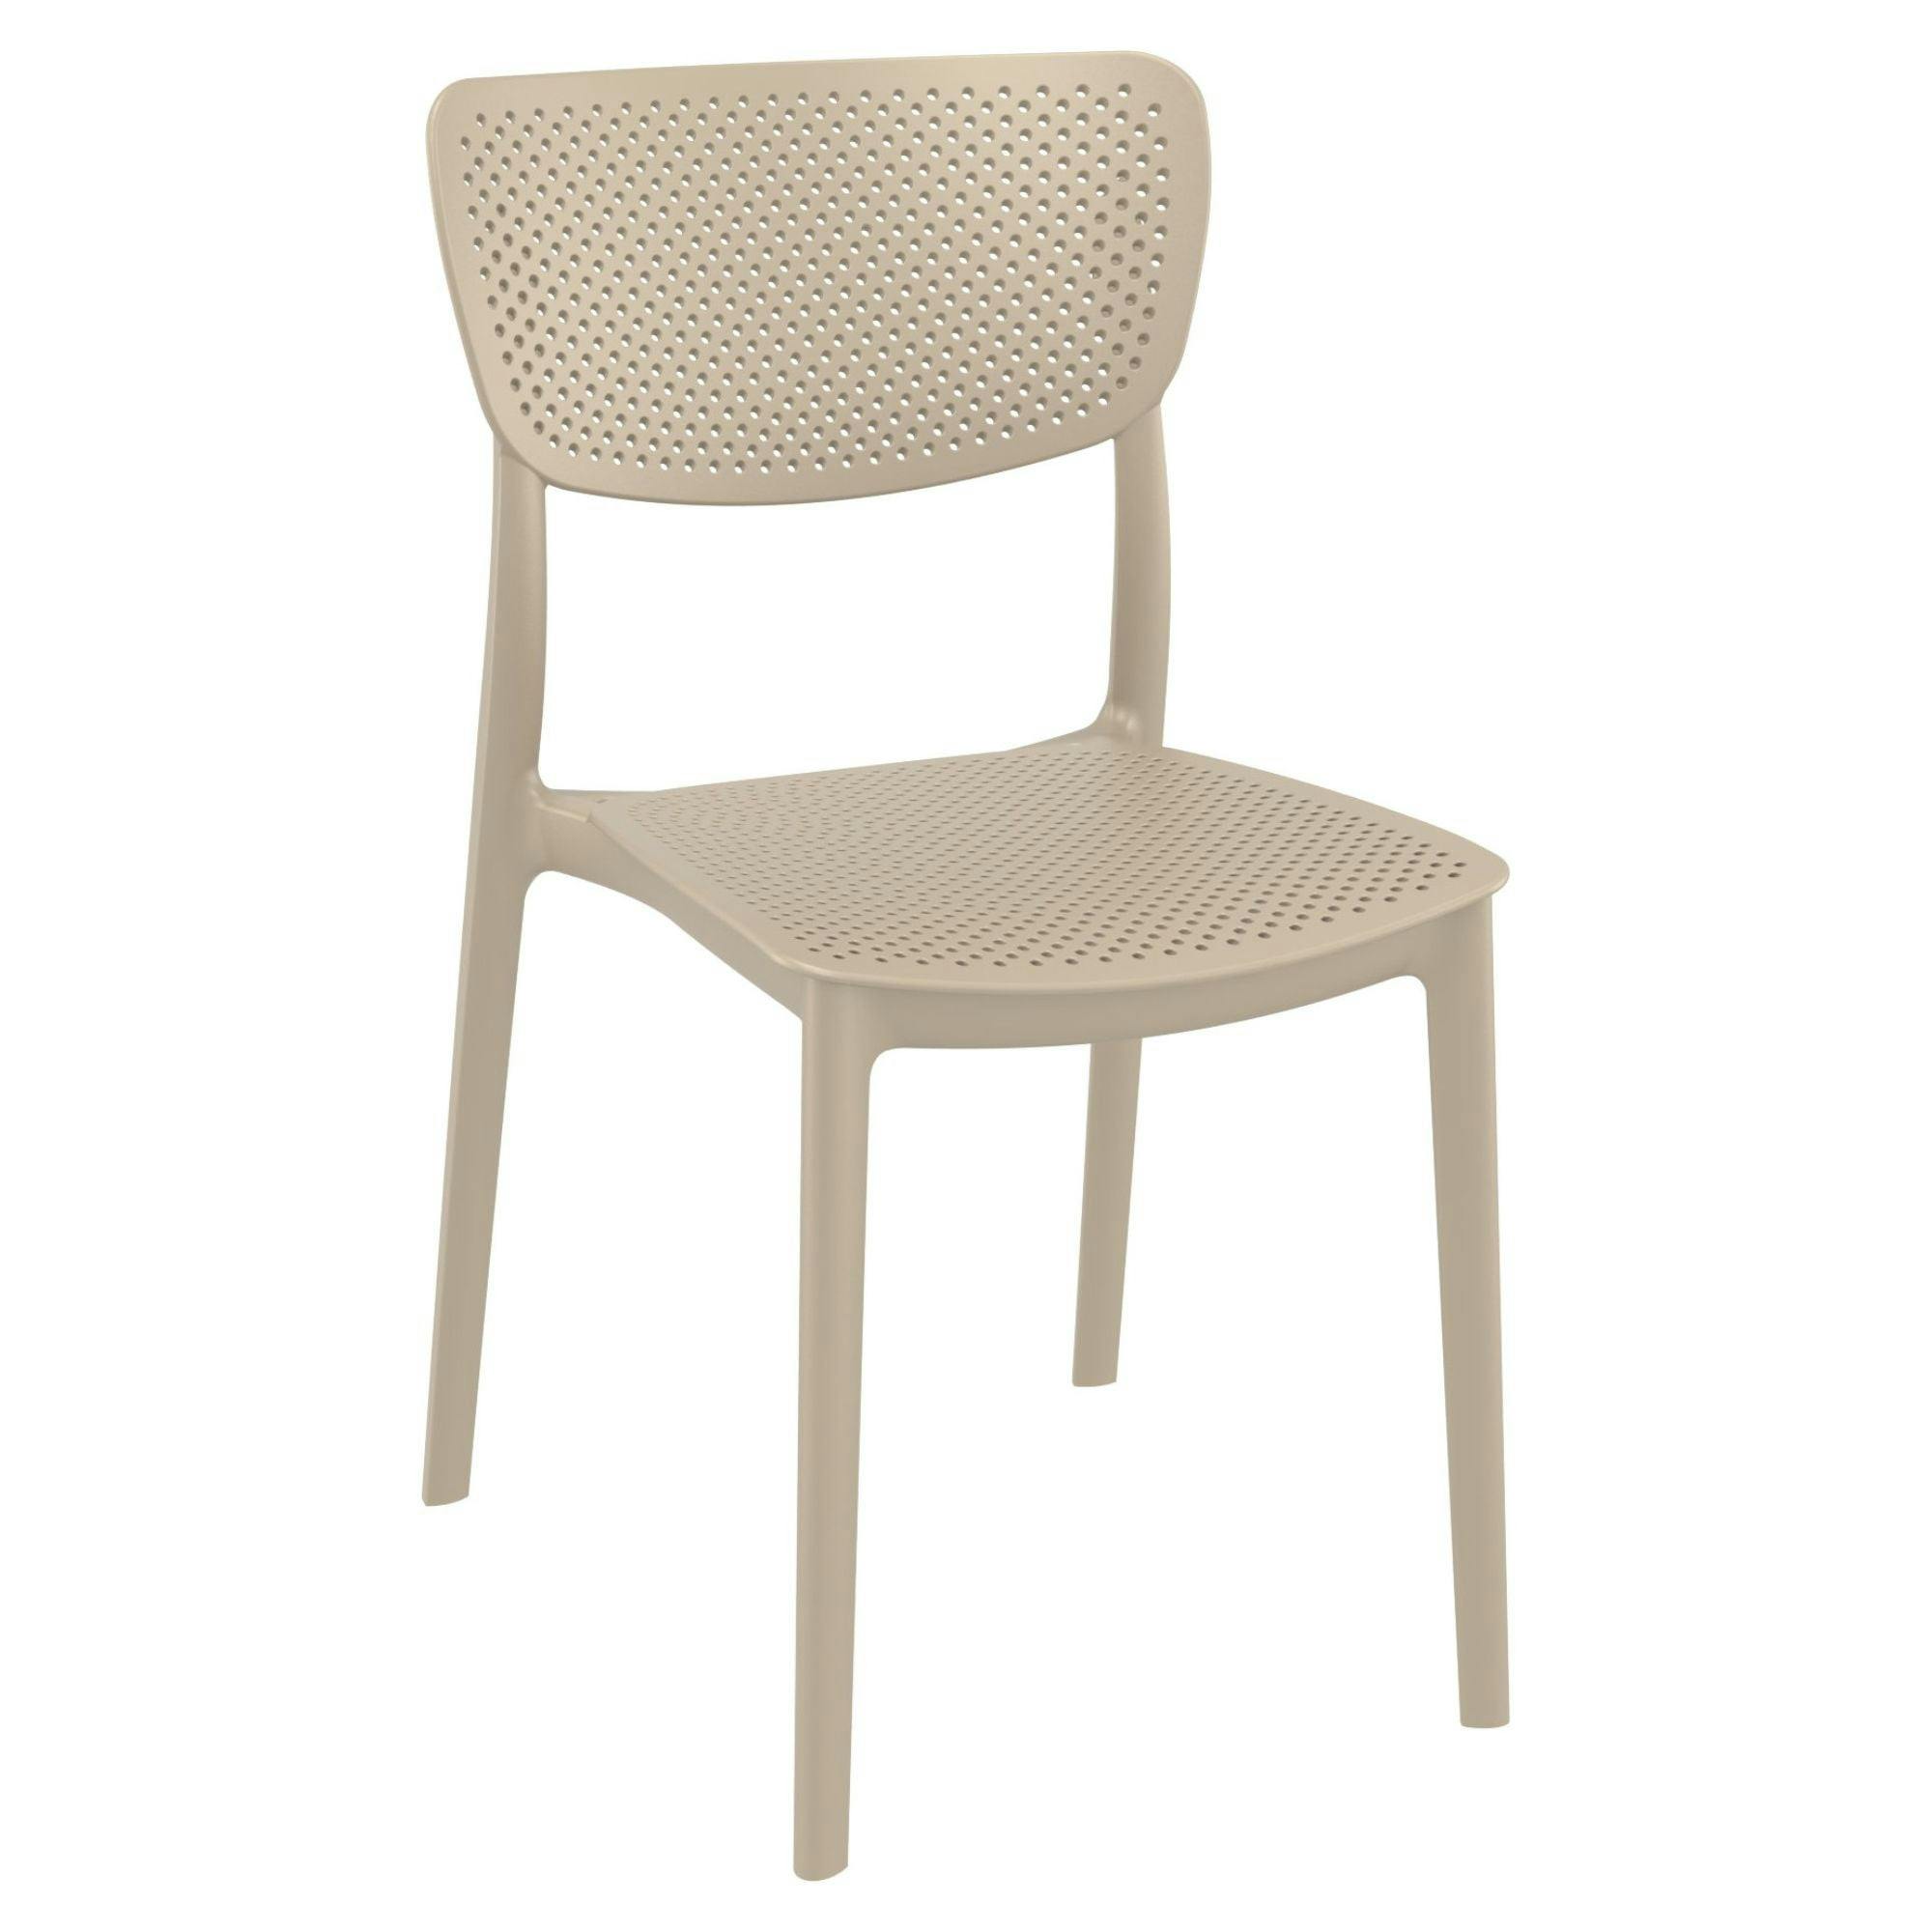 Transitional Taupe Brown Stackable Outdoor Dining Chair